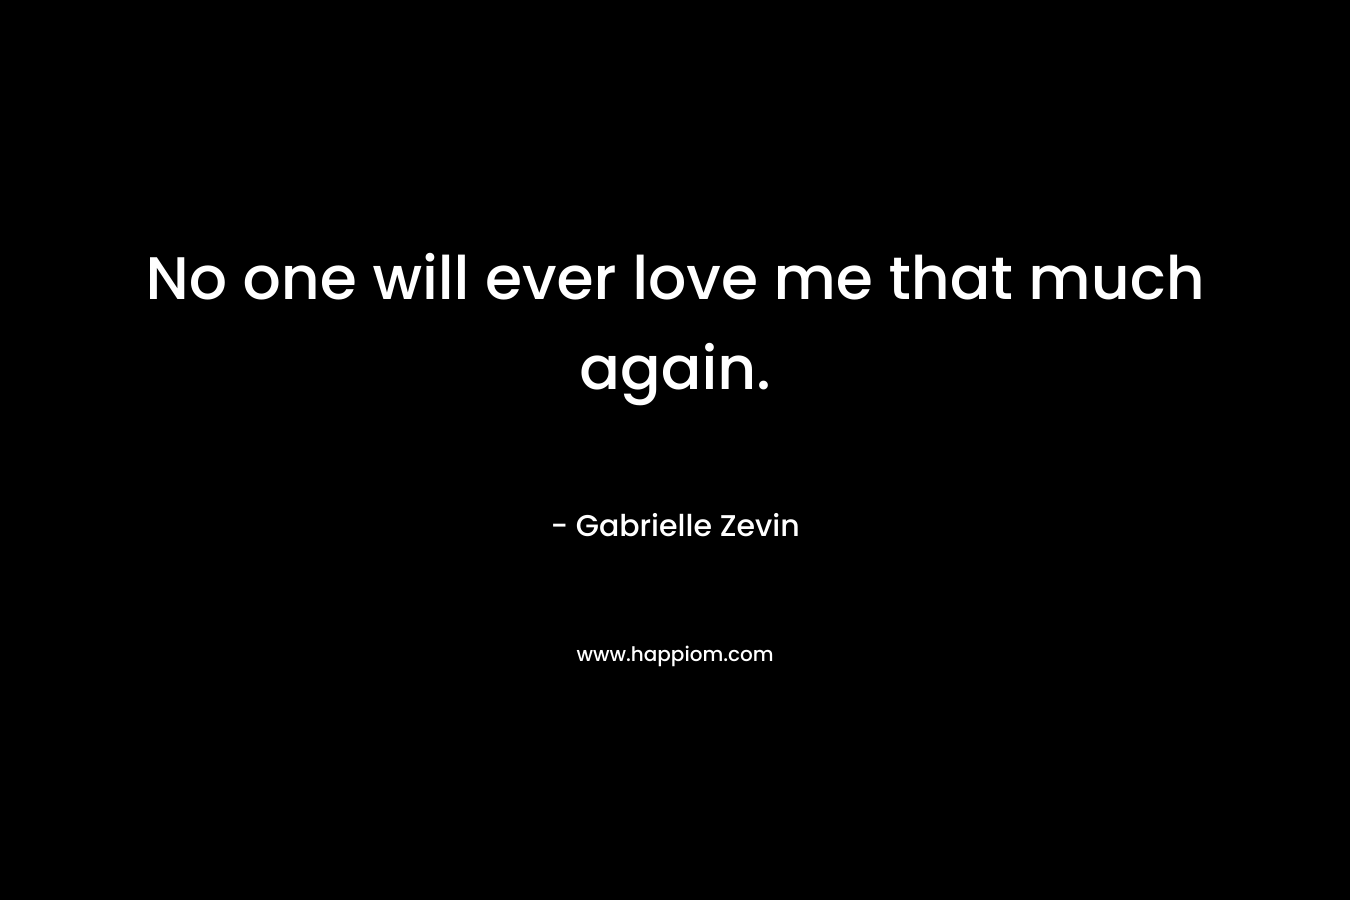 No one will ever love me that much again.